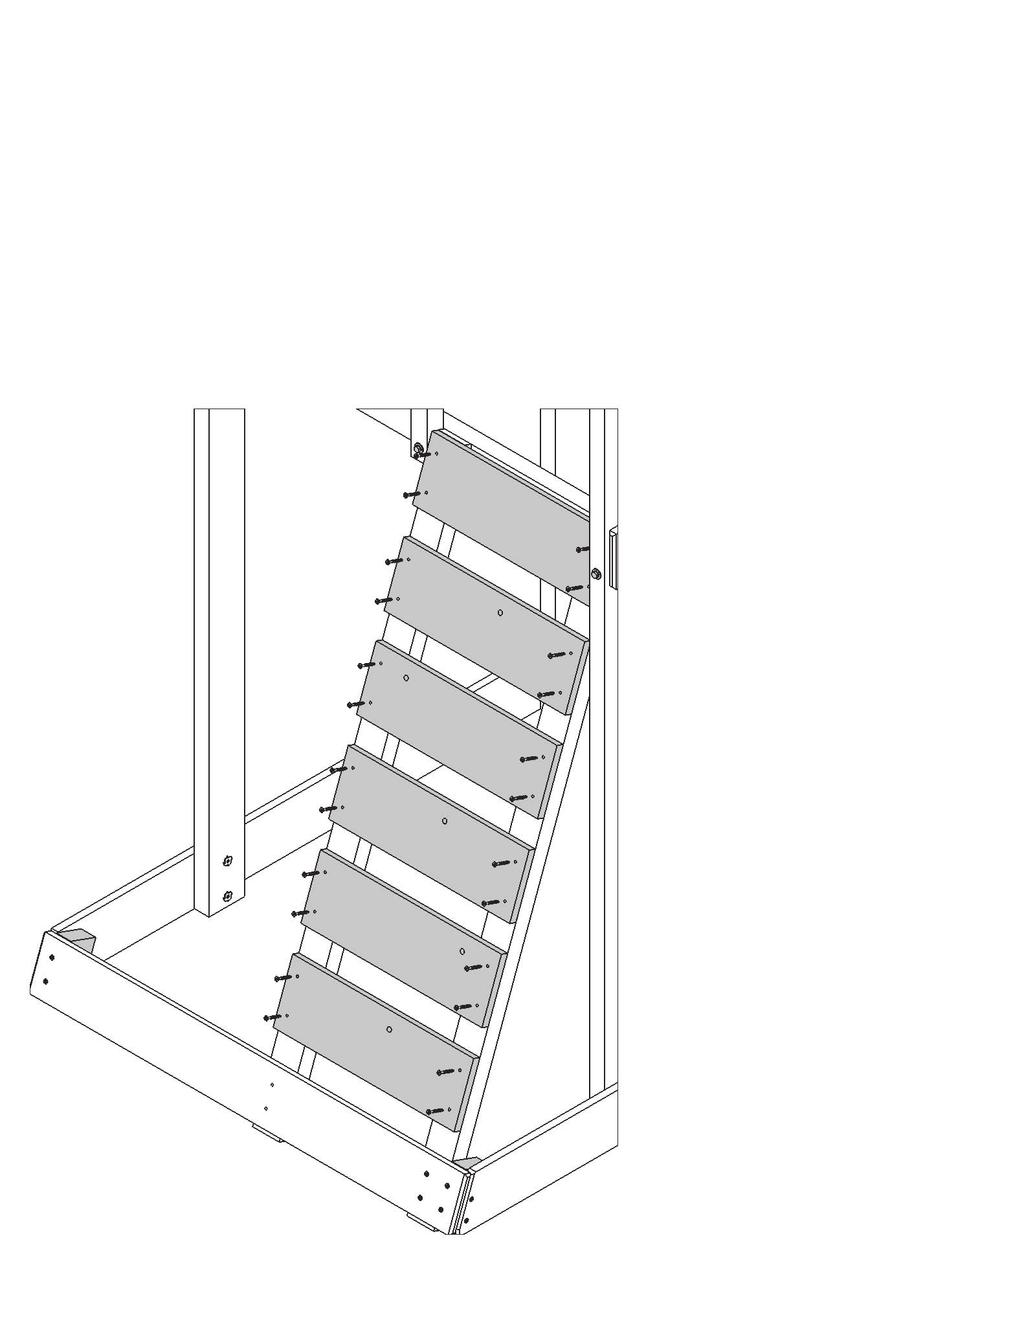 Step 13: Rock Wall Assembly A: Attach (1779) CE Access Board flush to the top and outside edges of each (0349) Rock Rail with 4 (S2) #8 x 1-1/2 Wood Screws. (fig. 13.1) B: Below (1779) CE Access Board stagger 3 (1777) CE Rock Board B and 2 (1778) CE Rock Board A as shown in fig.